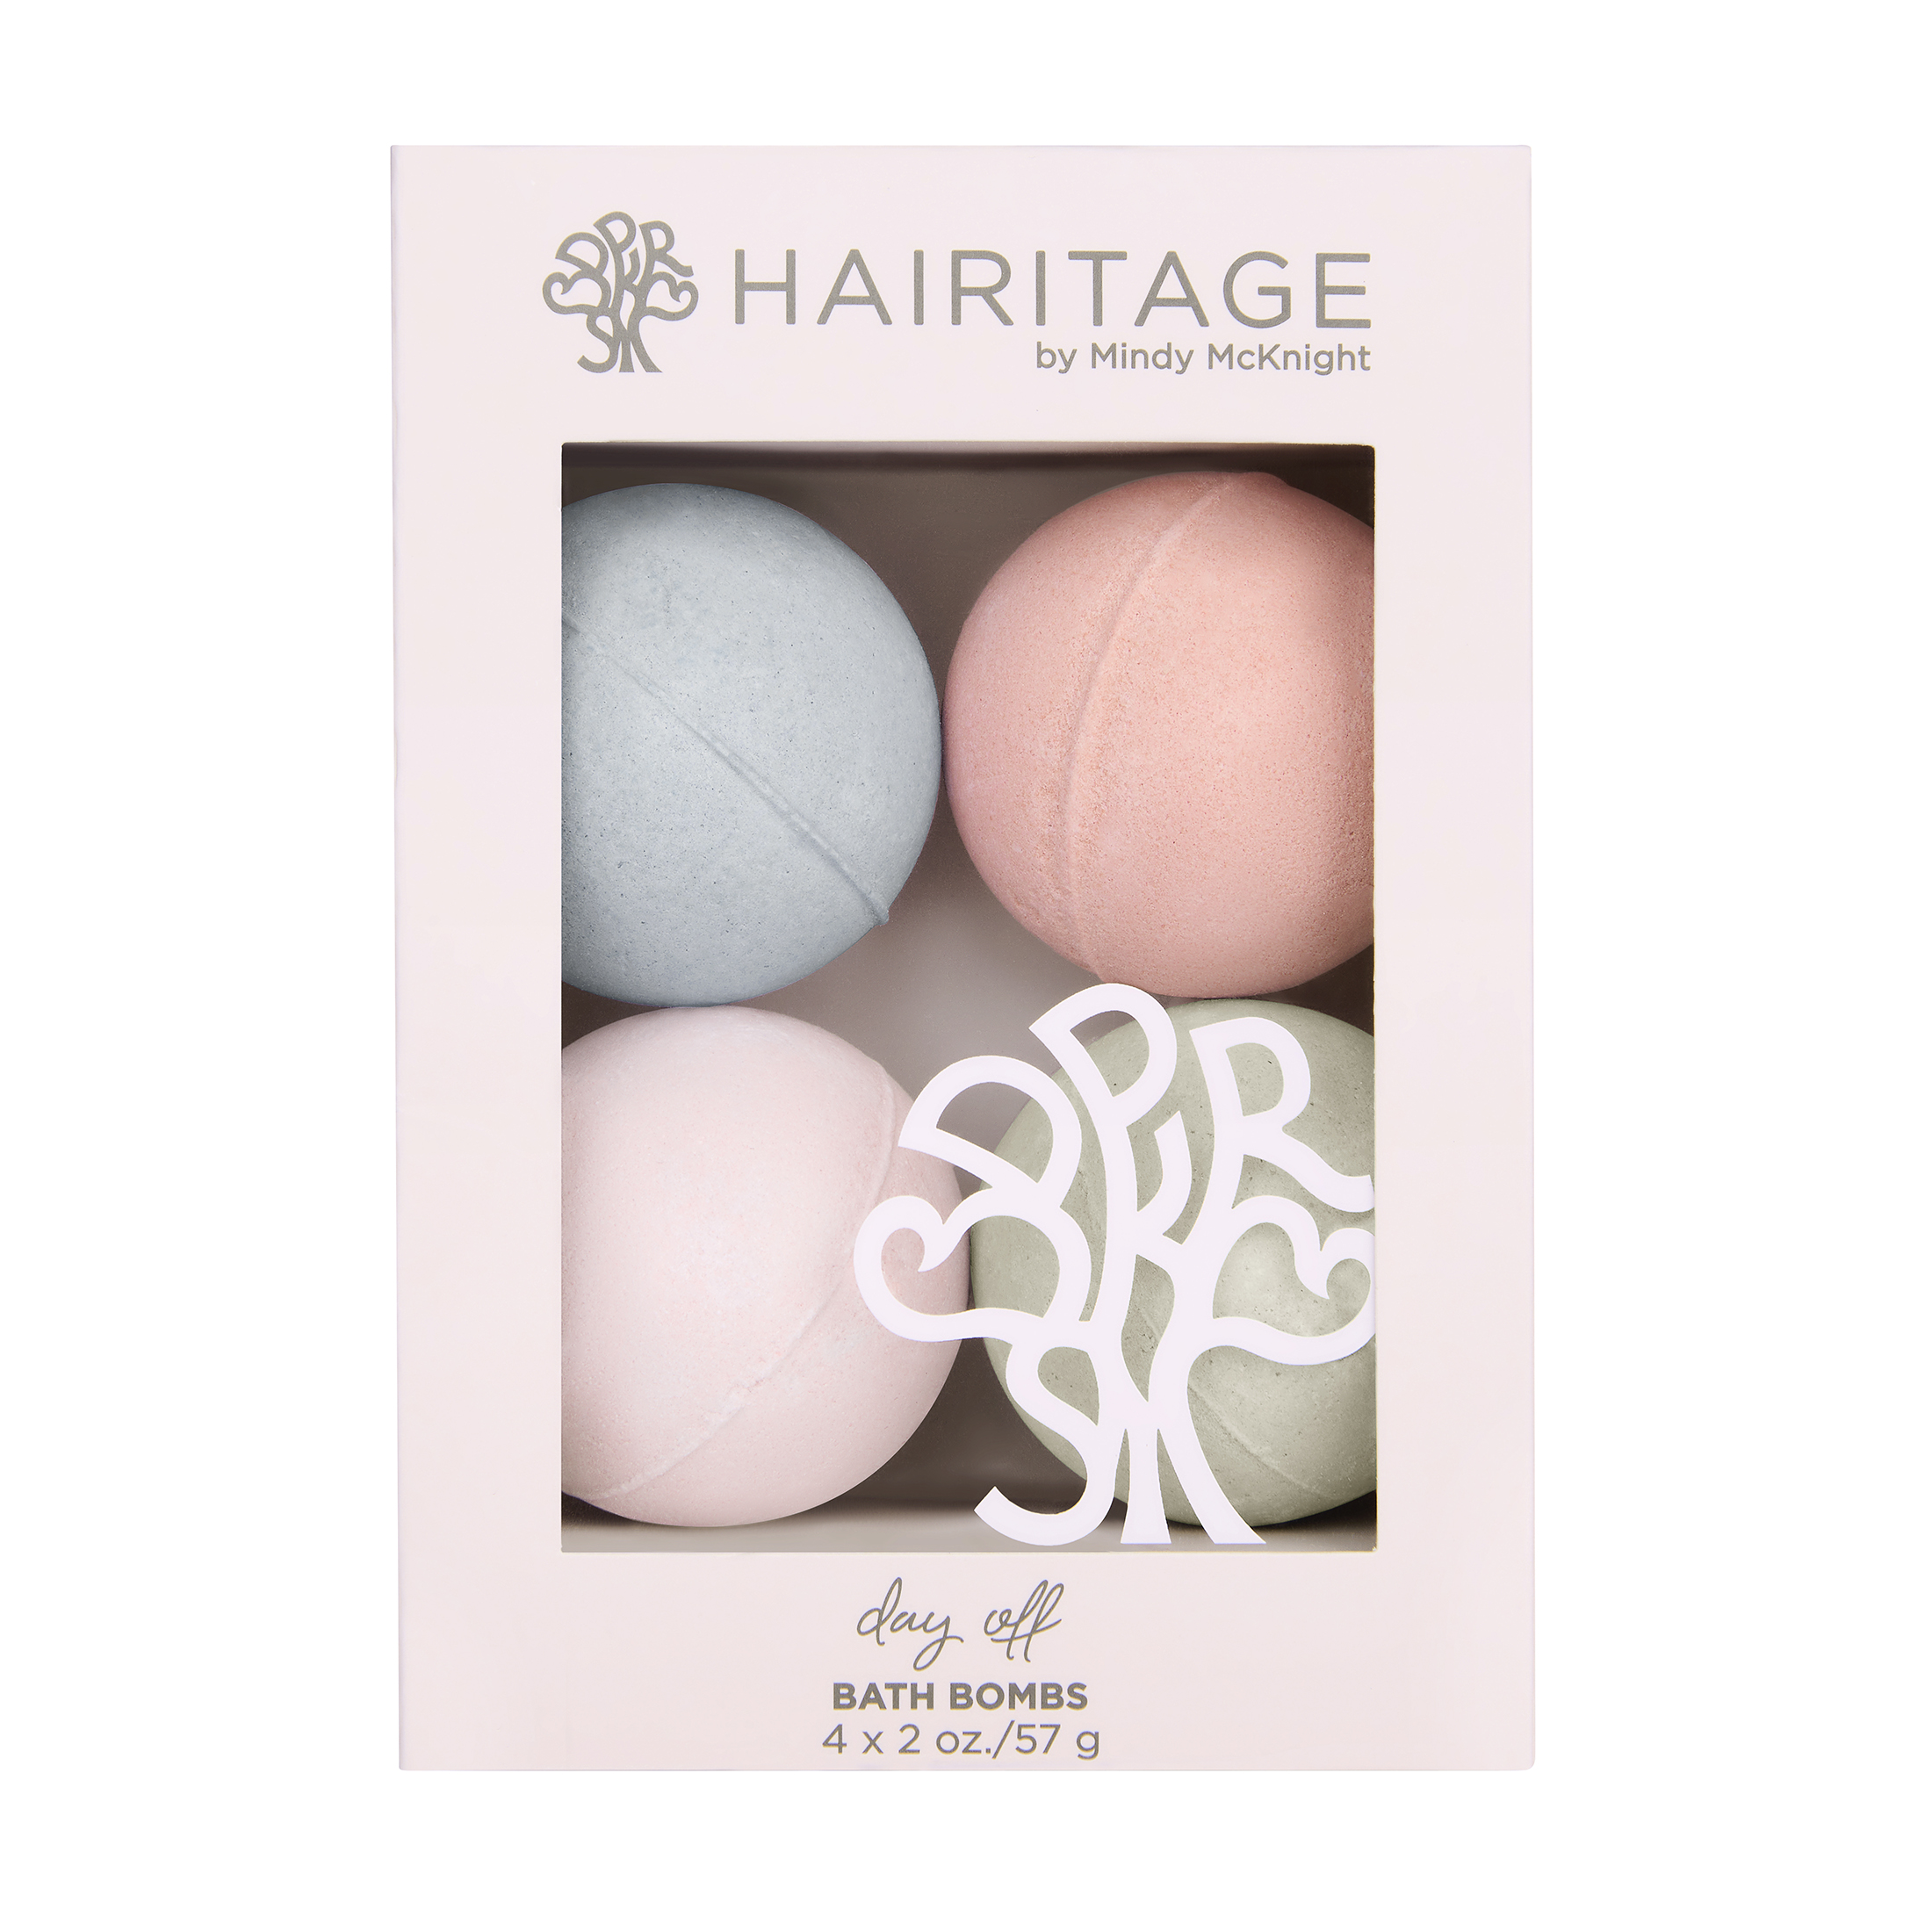 Hairitage Day Off Bath Bombs (Assorted Pack of 4), 2 oz. - image 1 of 7